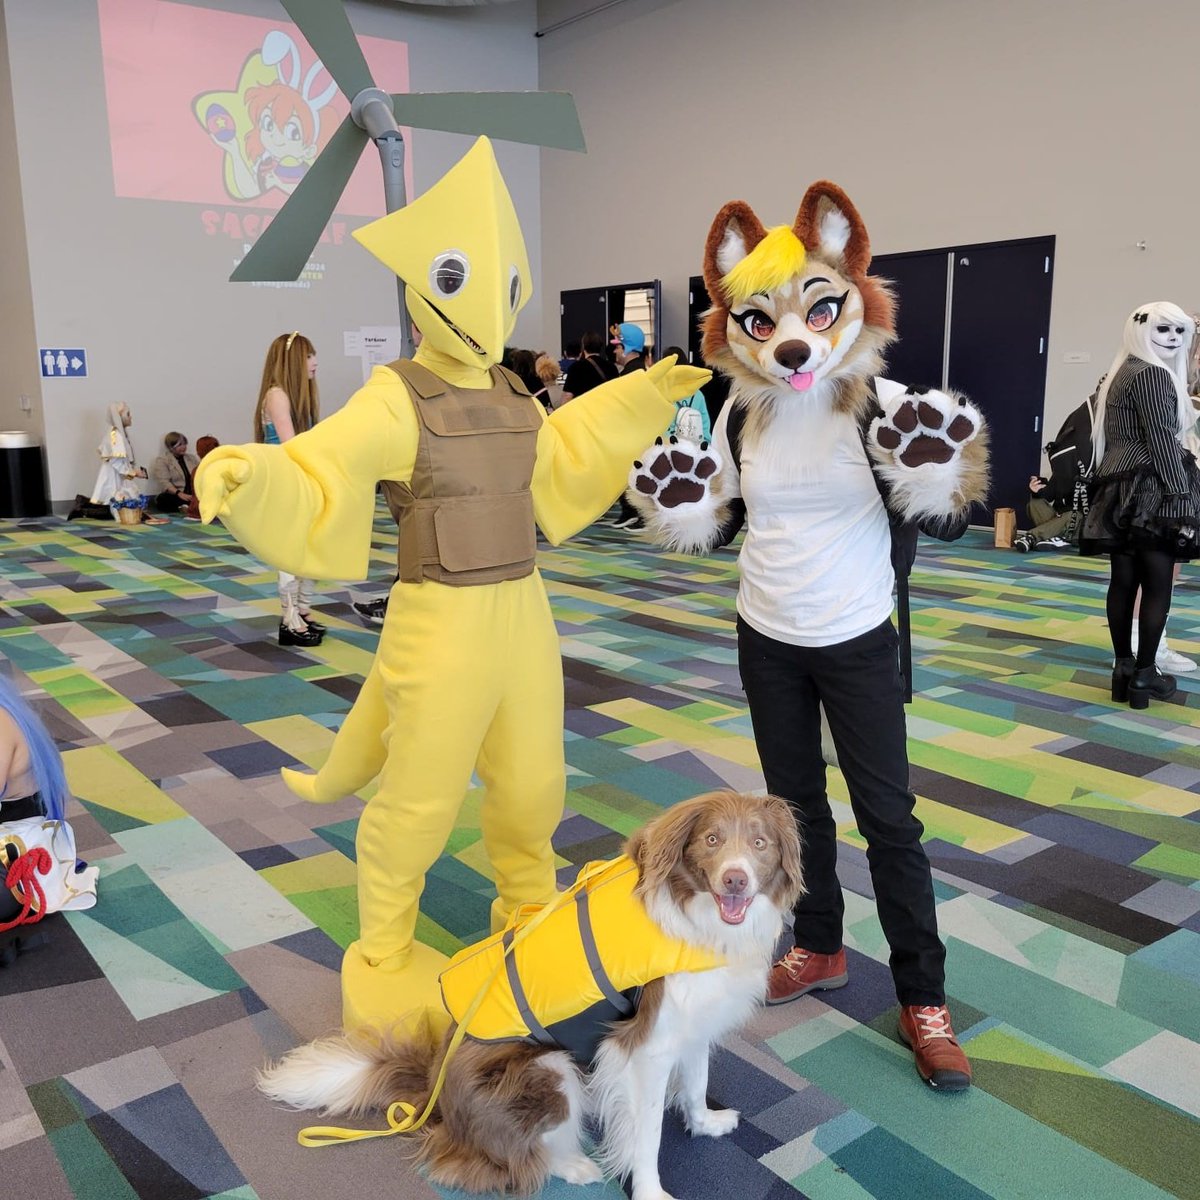 A random doggie was placed into our photo lol, but here's a quick pic from SacAnime Roseville! 🐶🪡: @dog_juicy